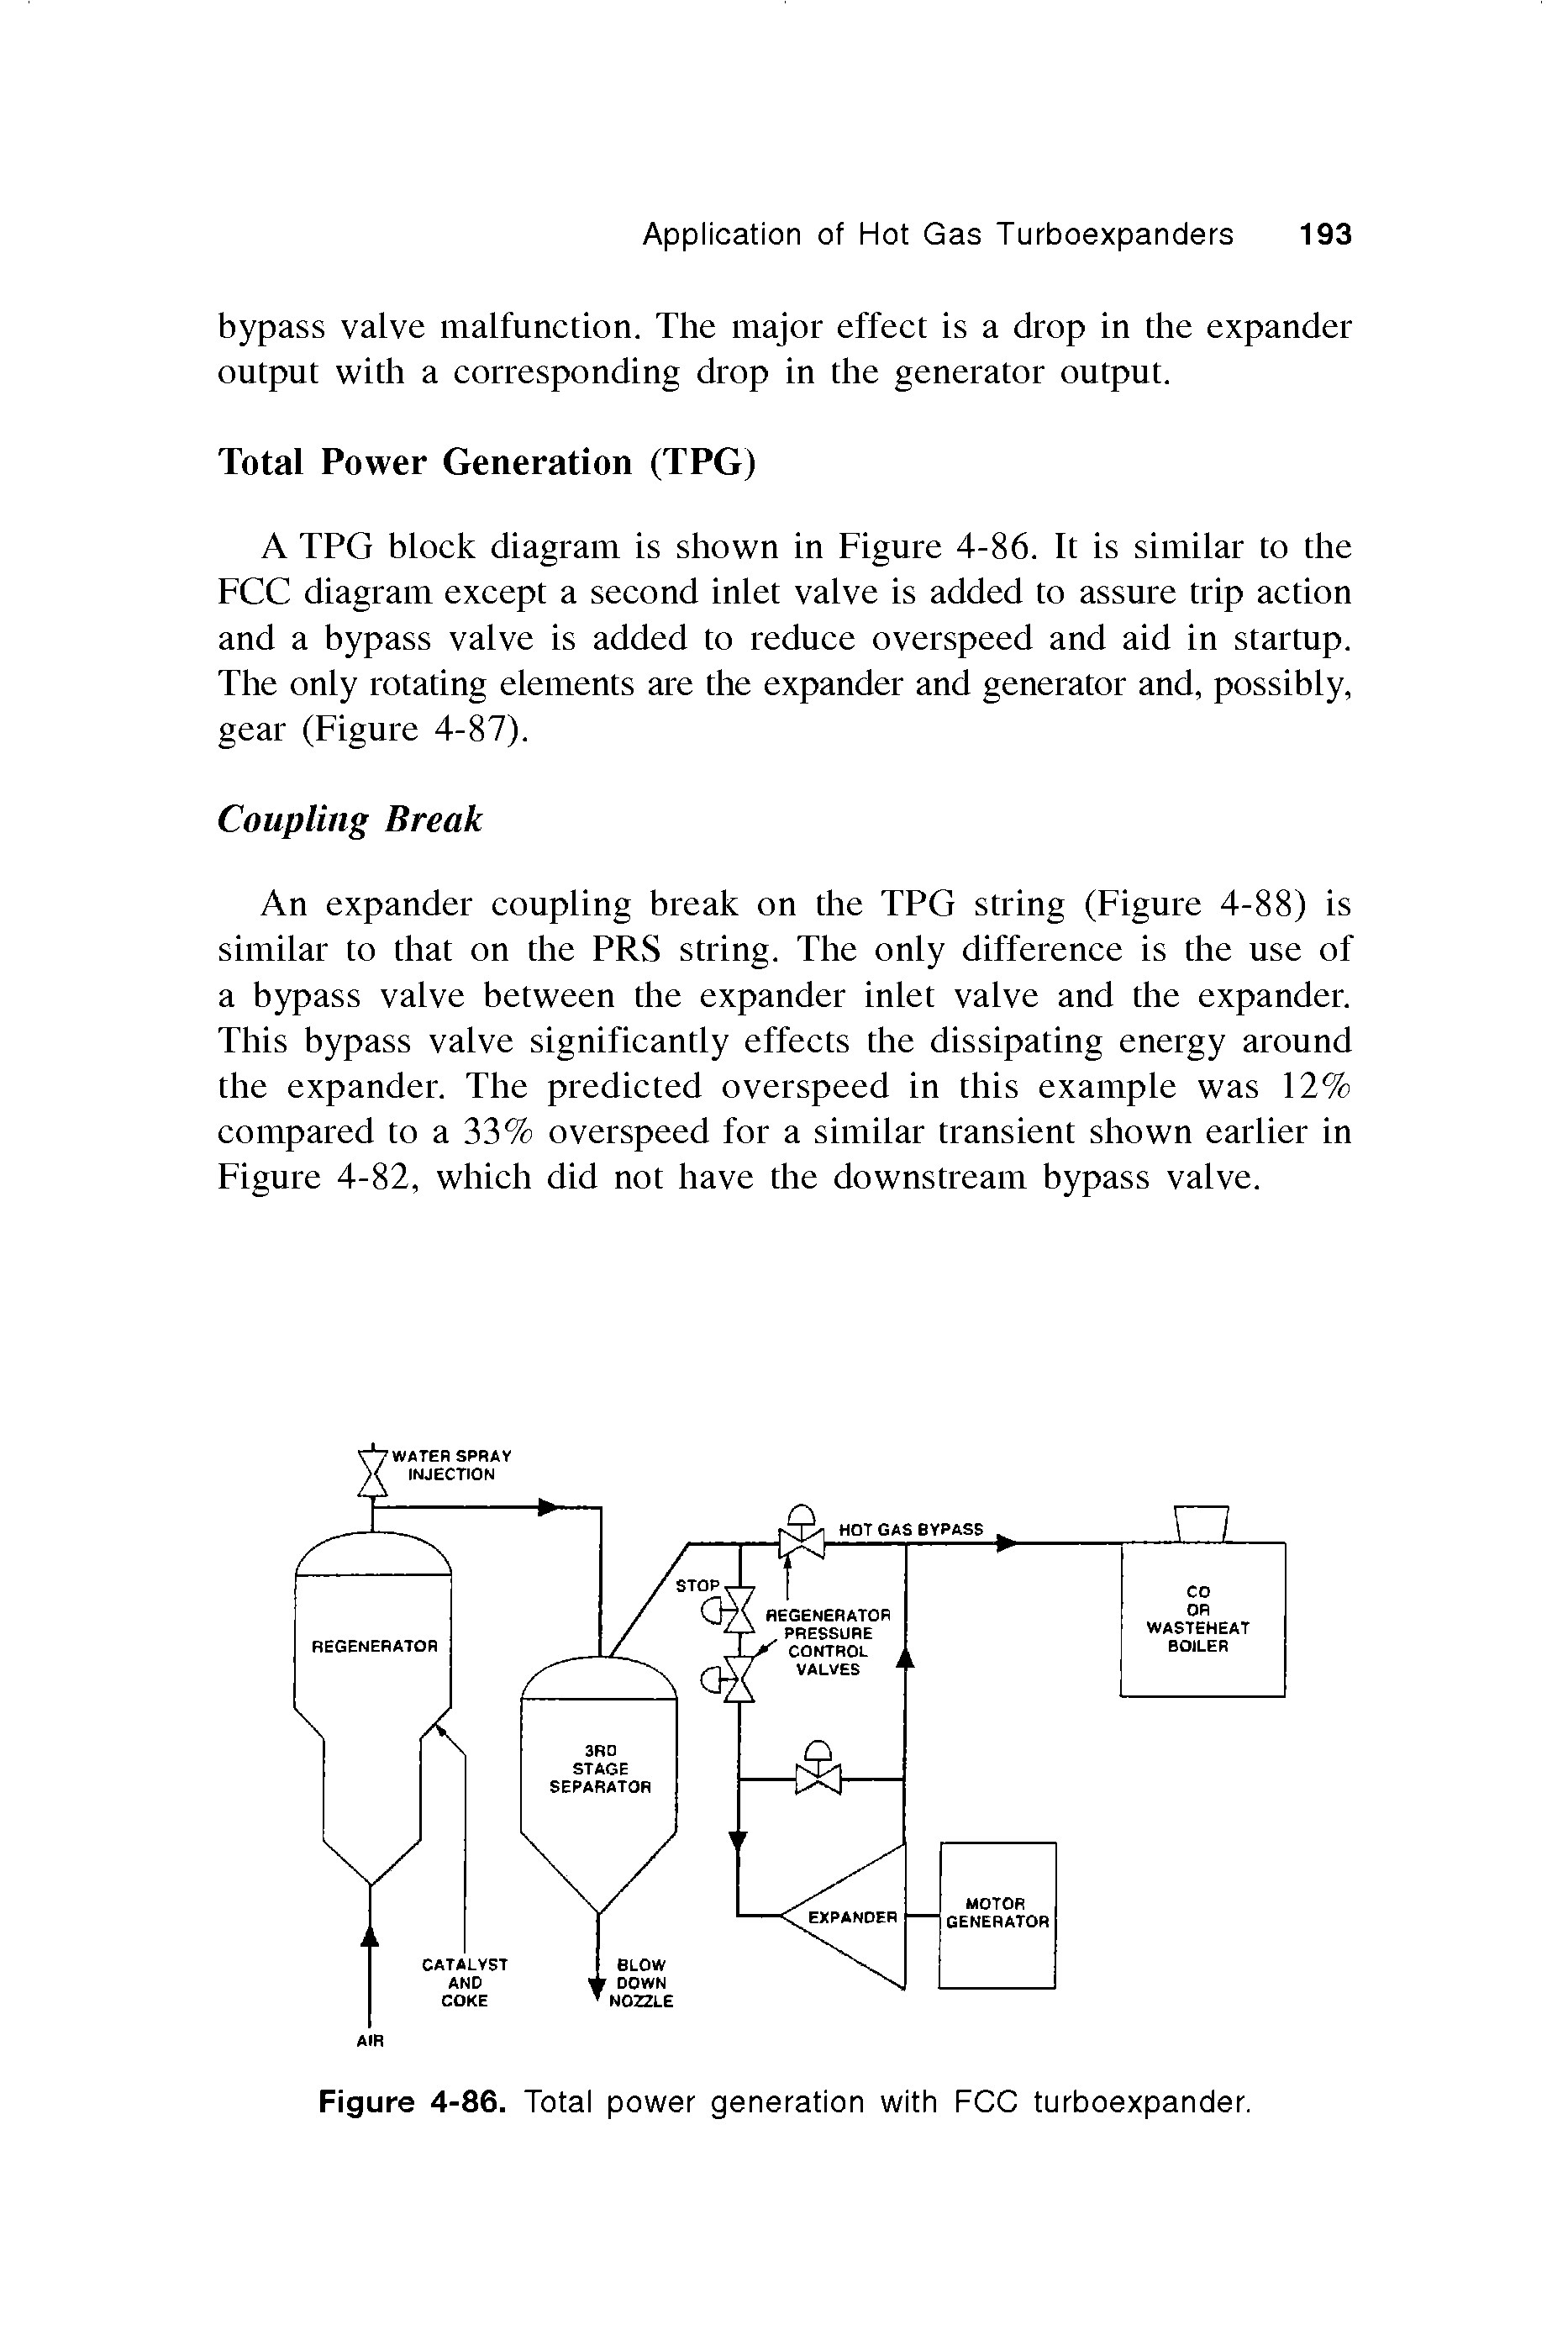 Figure 4-86. Total power generation with FCC turboexpander.